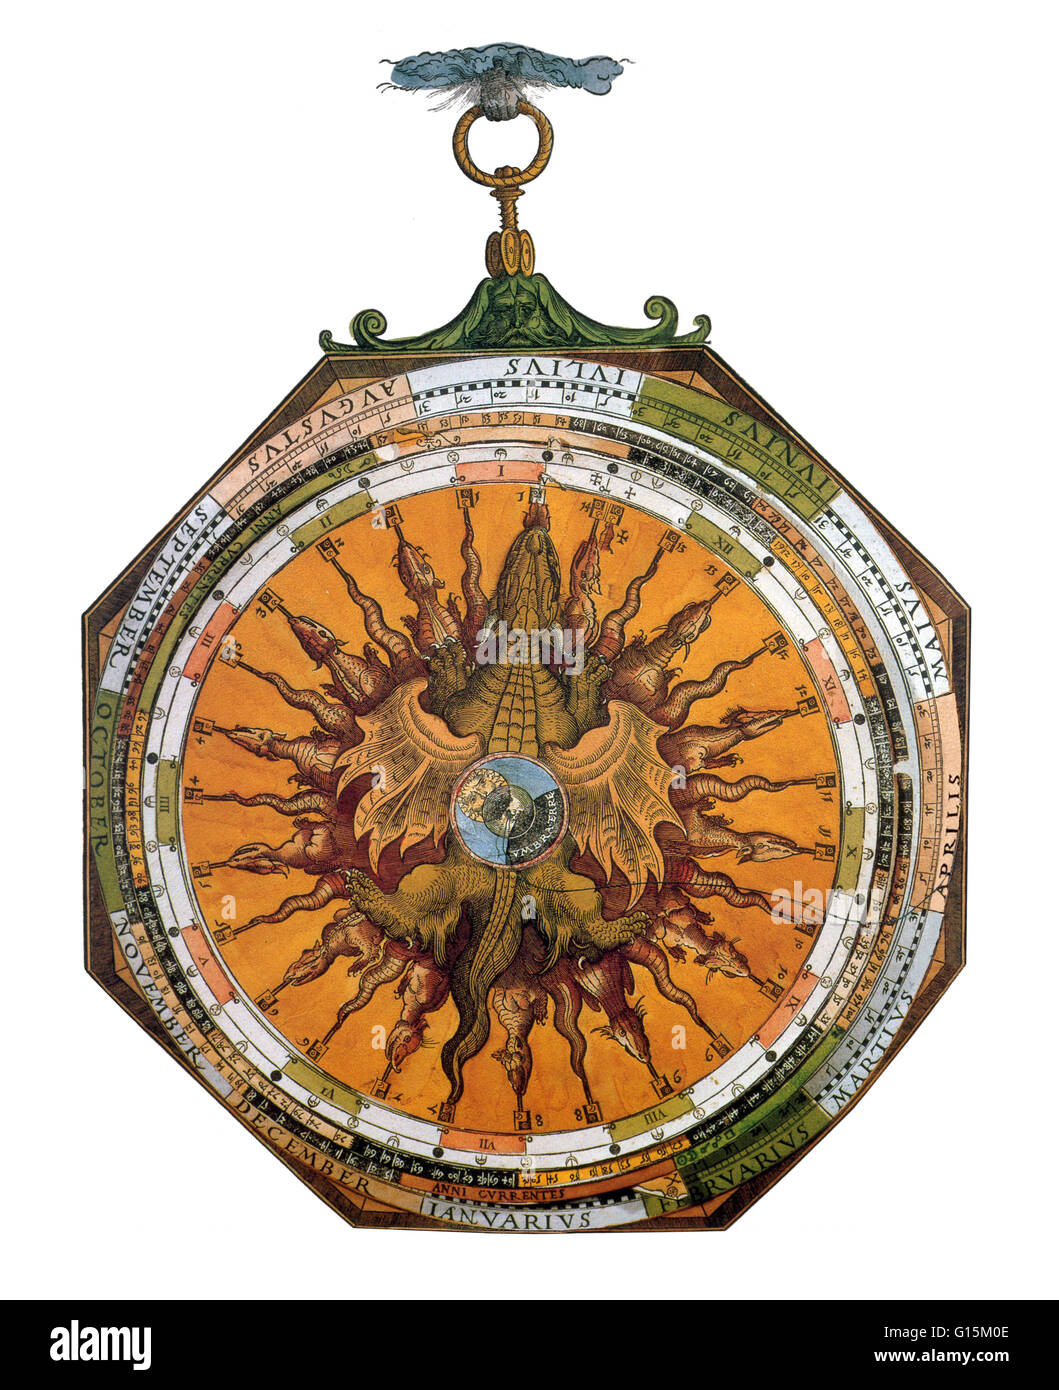 Astronomicum Caesareum depicts the cosmos and heavens according to the 1400 year old Ptolemaic system, which maintained that the sun revolved around the earth. By means of hand colored maps and moveable paper parts (volvelles), Petrus Apianus (1495-1552) Stock Photo